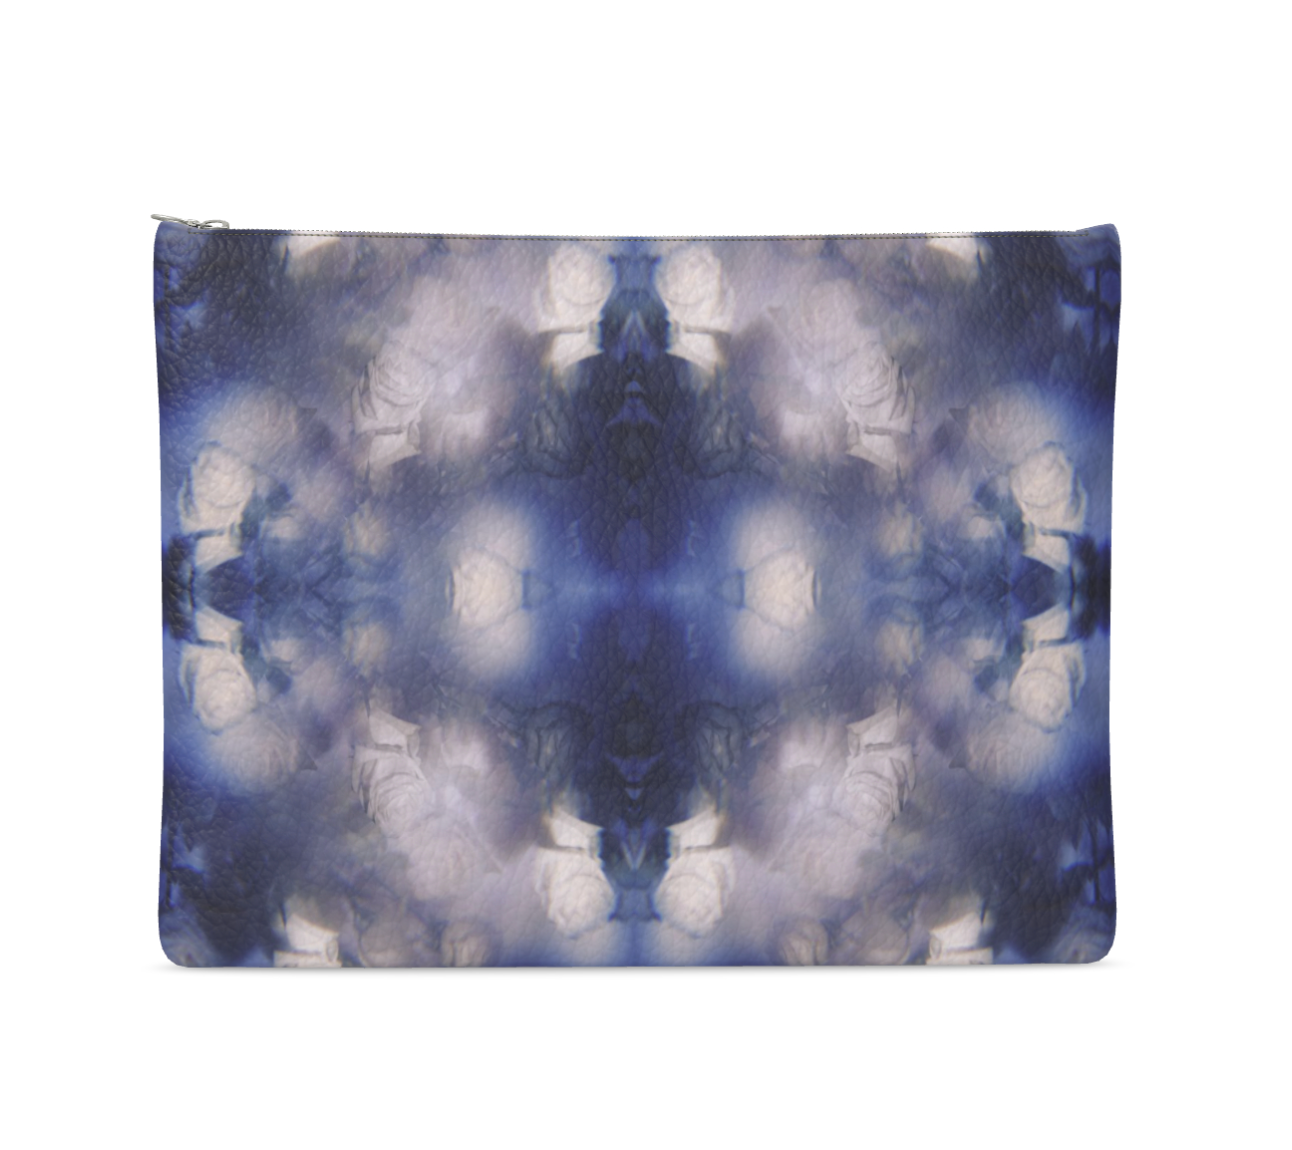 UNTITLED x Indira Cesarine "Les Roses Violettes" Kaleidoscopic Clutch Bag - Limited Edition